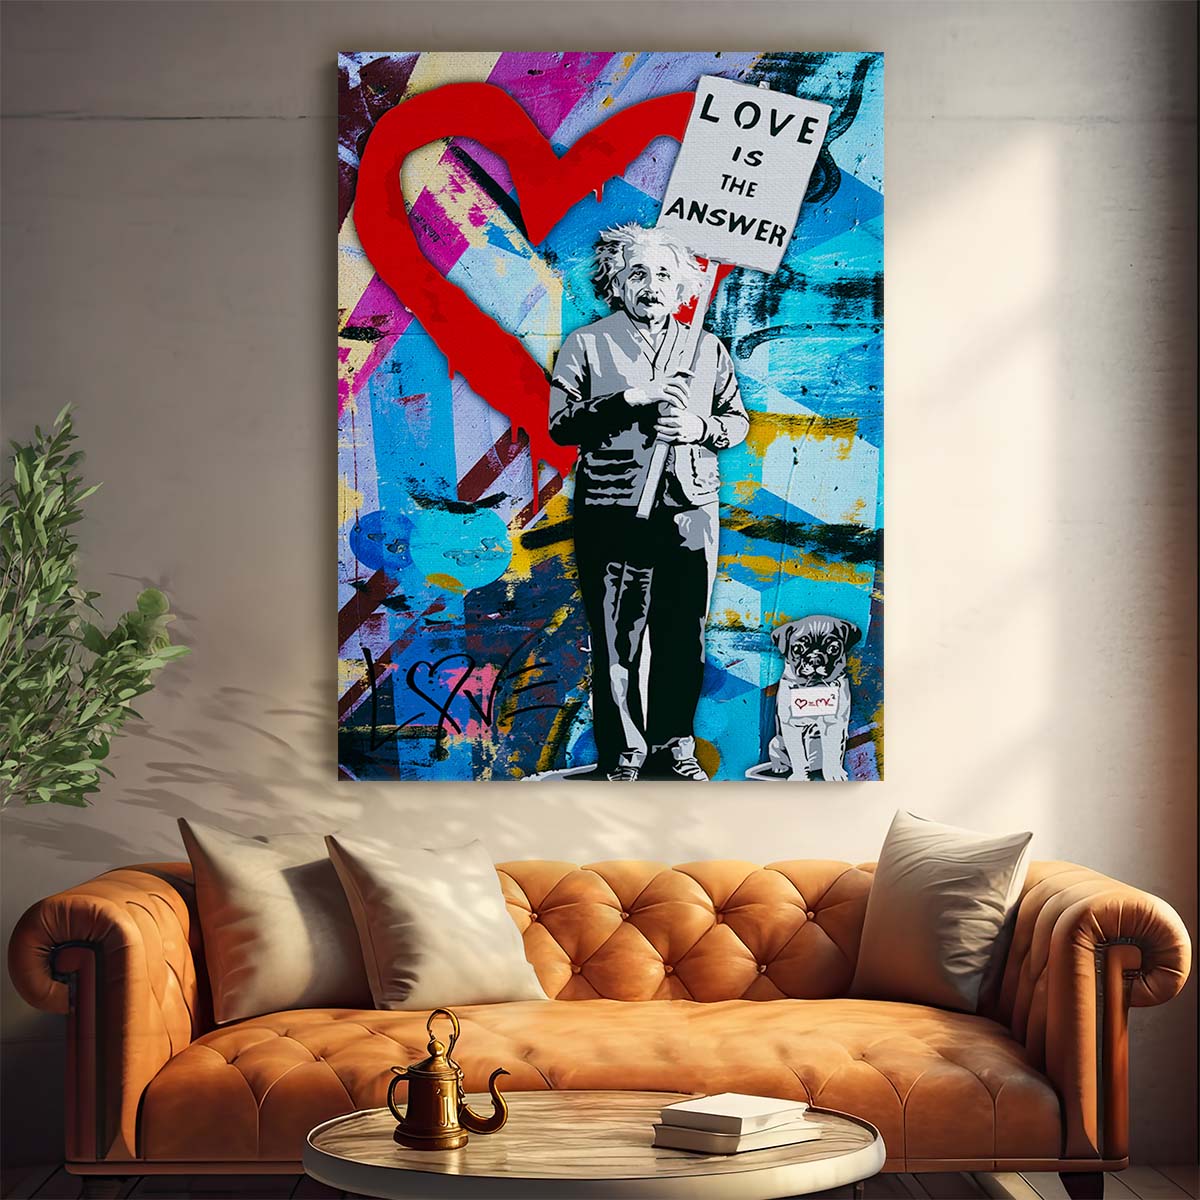 Banksy Einstein Love Is The Answer Graffiti Wall Art by Luxuriance Designs. Made in USA.